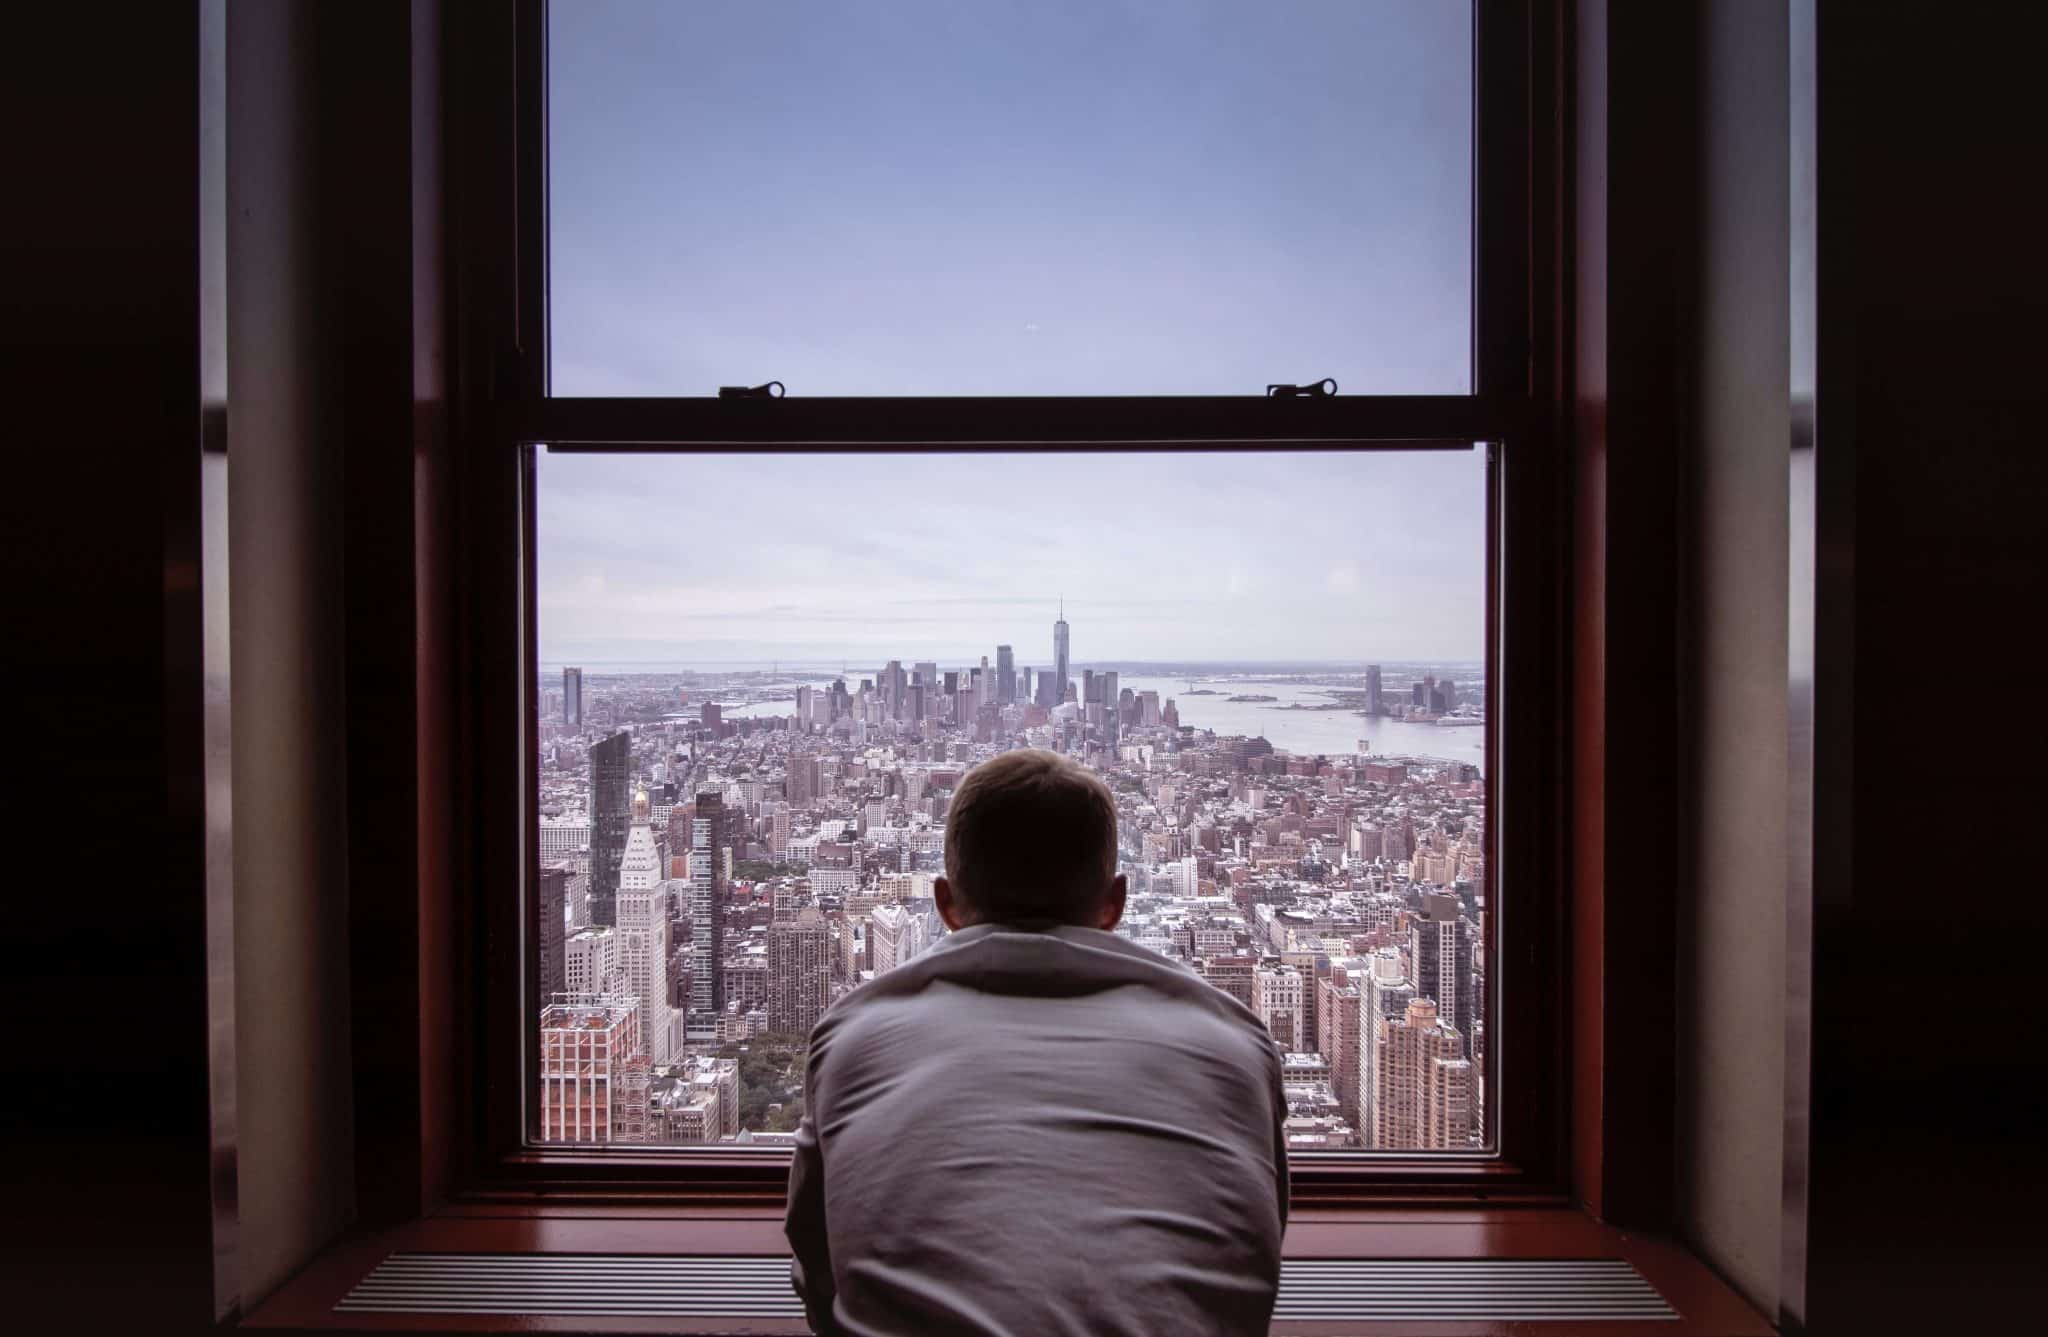 University of the People student reflecting from NYC window